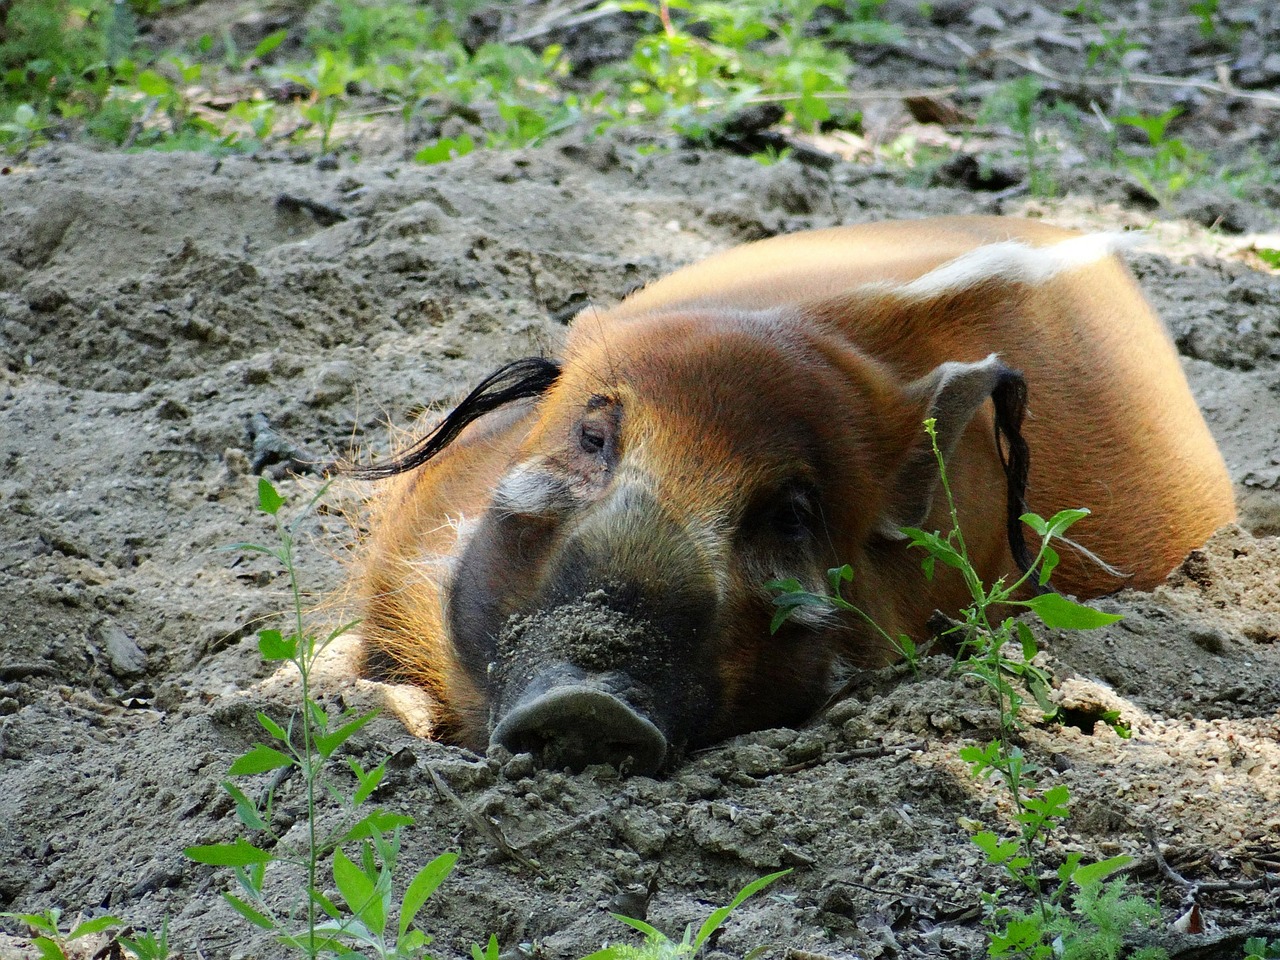 Visit Dublin Zoo and see the Red River Hog